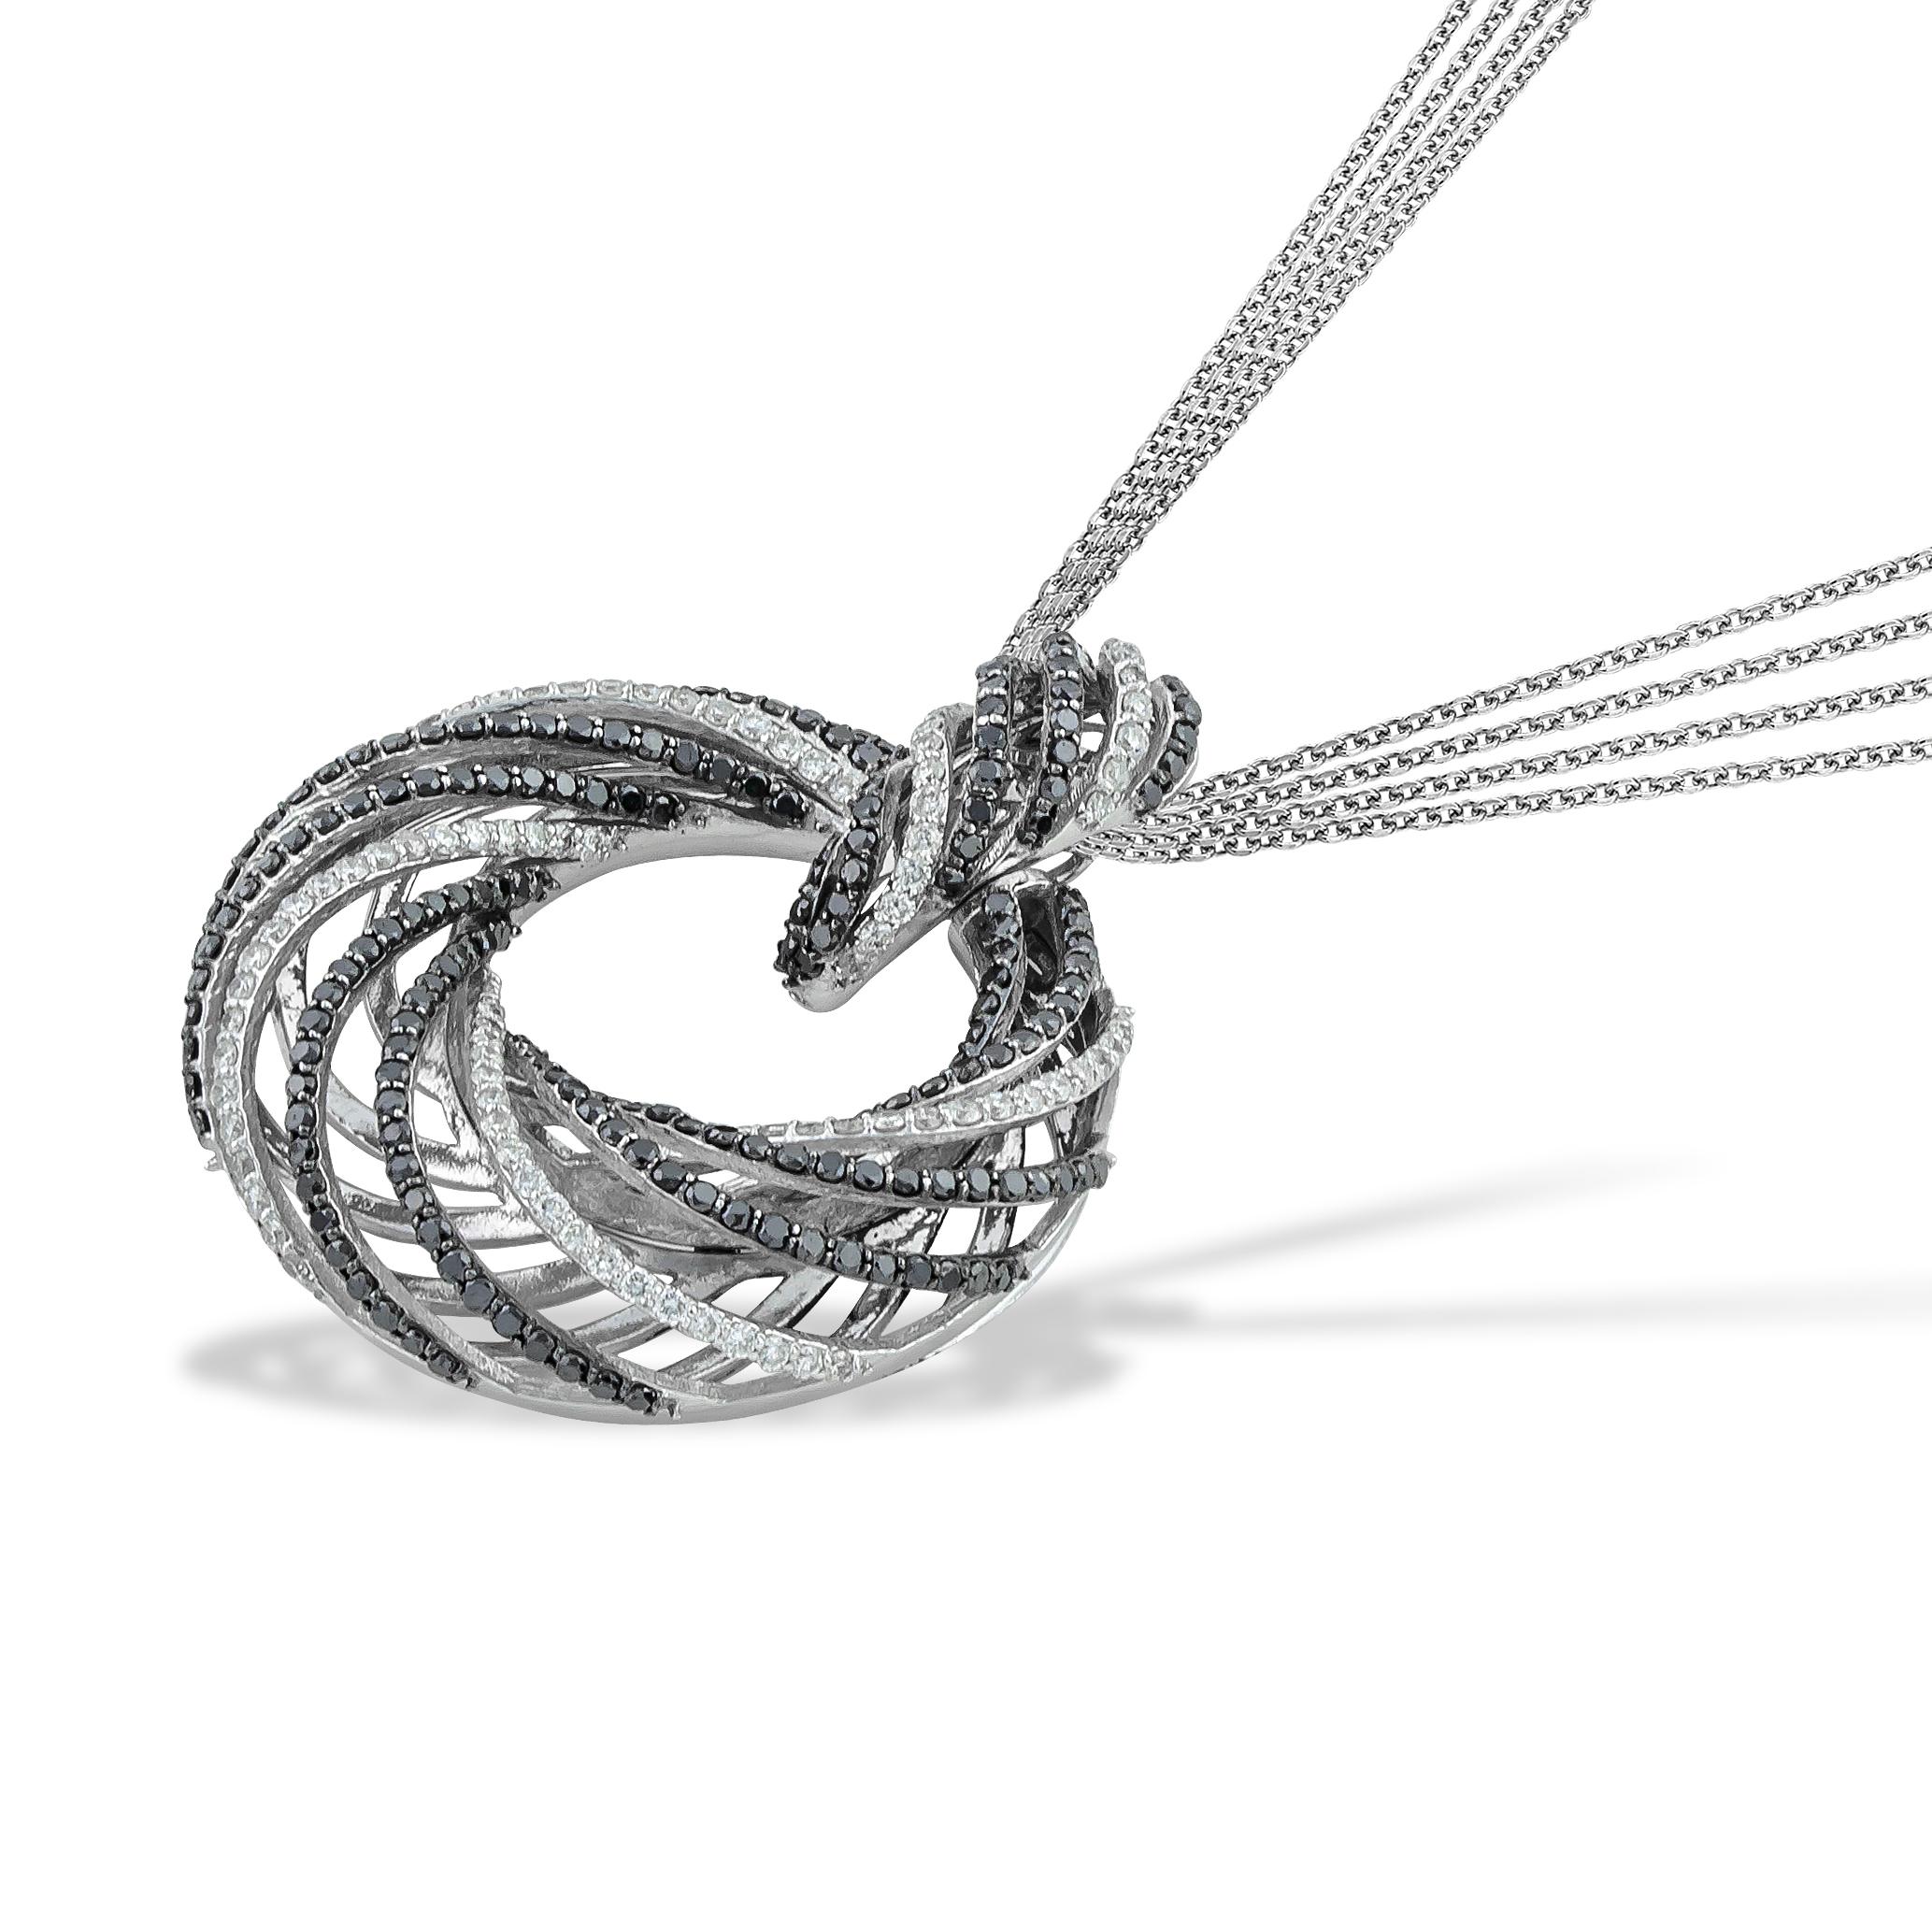 Round Croissant Black and White Pave Diamonds Pendant Necklace in 18kt White Gold. This diamond masterpiece comes with Multi Chain ( x4 diamond cut rolo chain) in 18kt White Gold. This necklace belongs to 